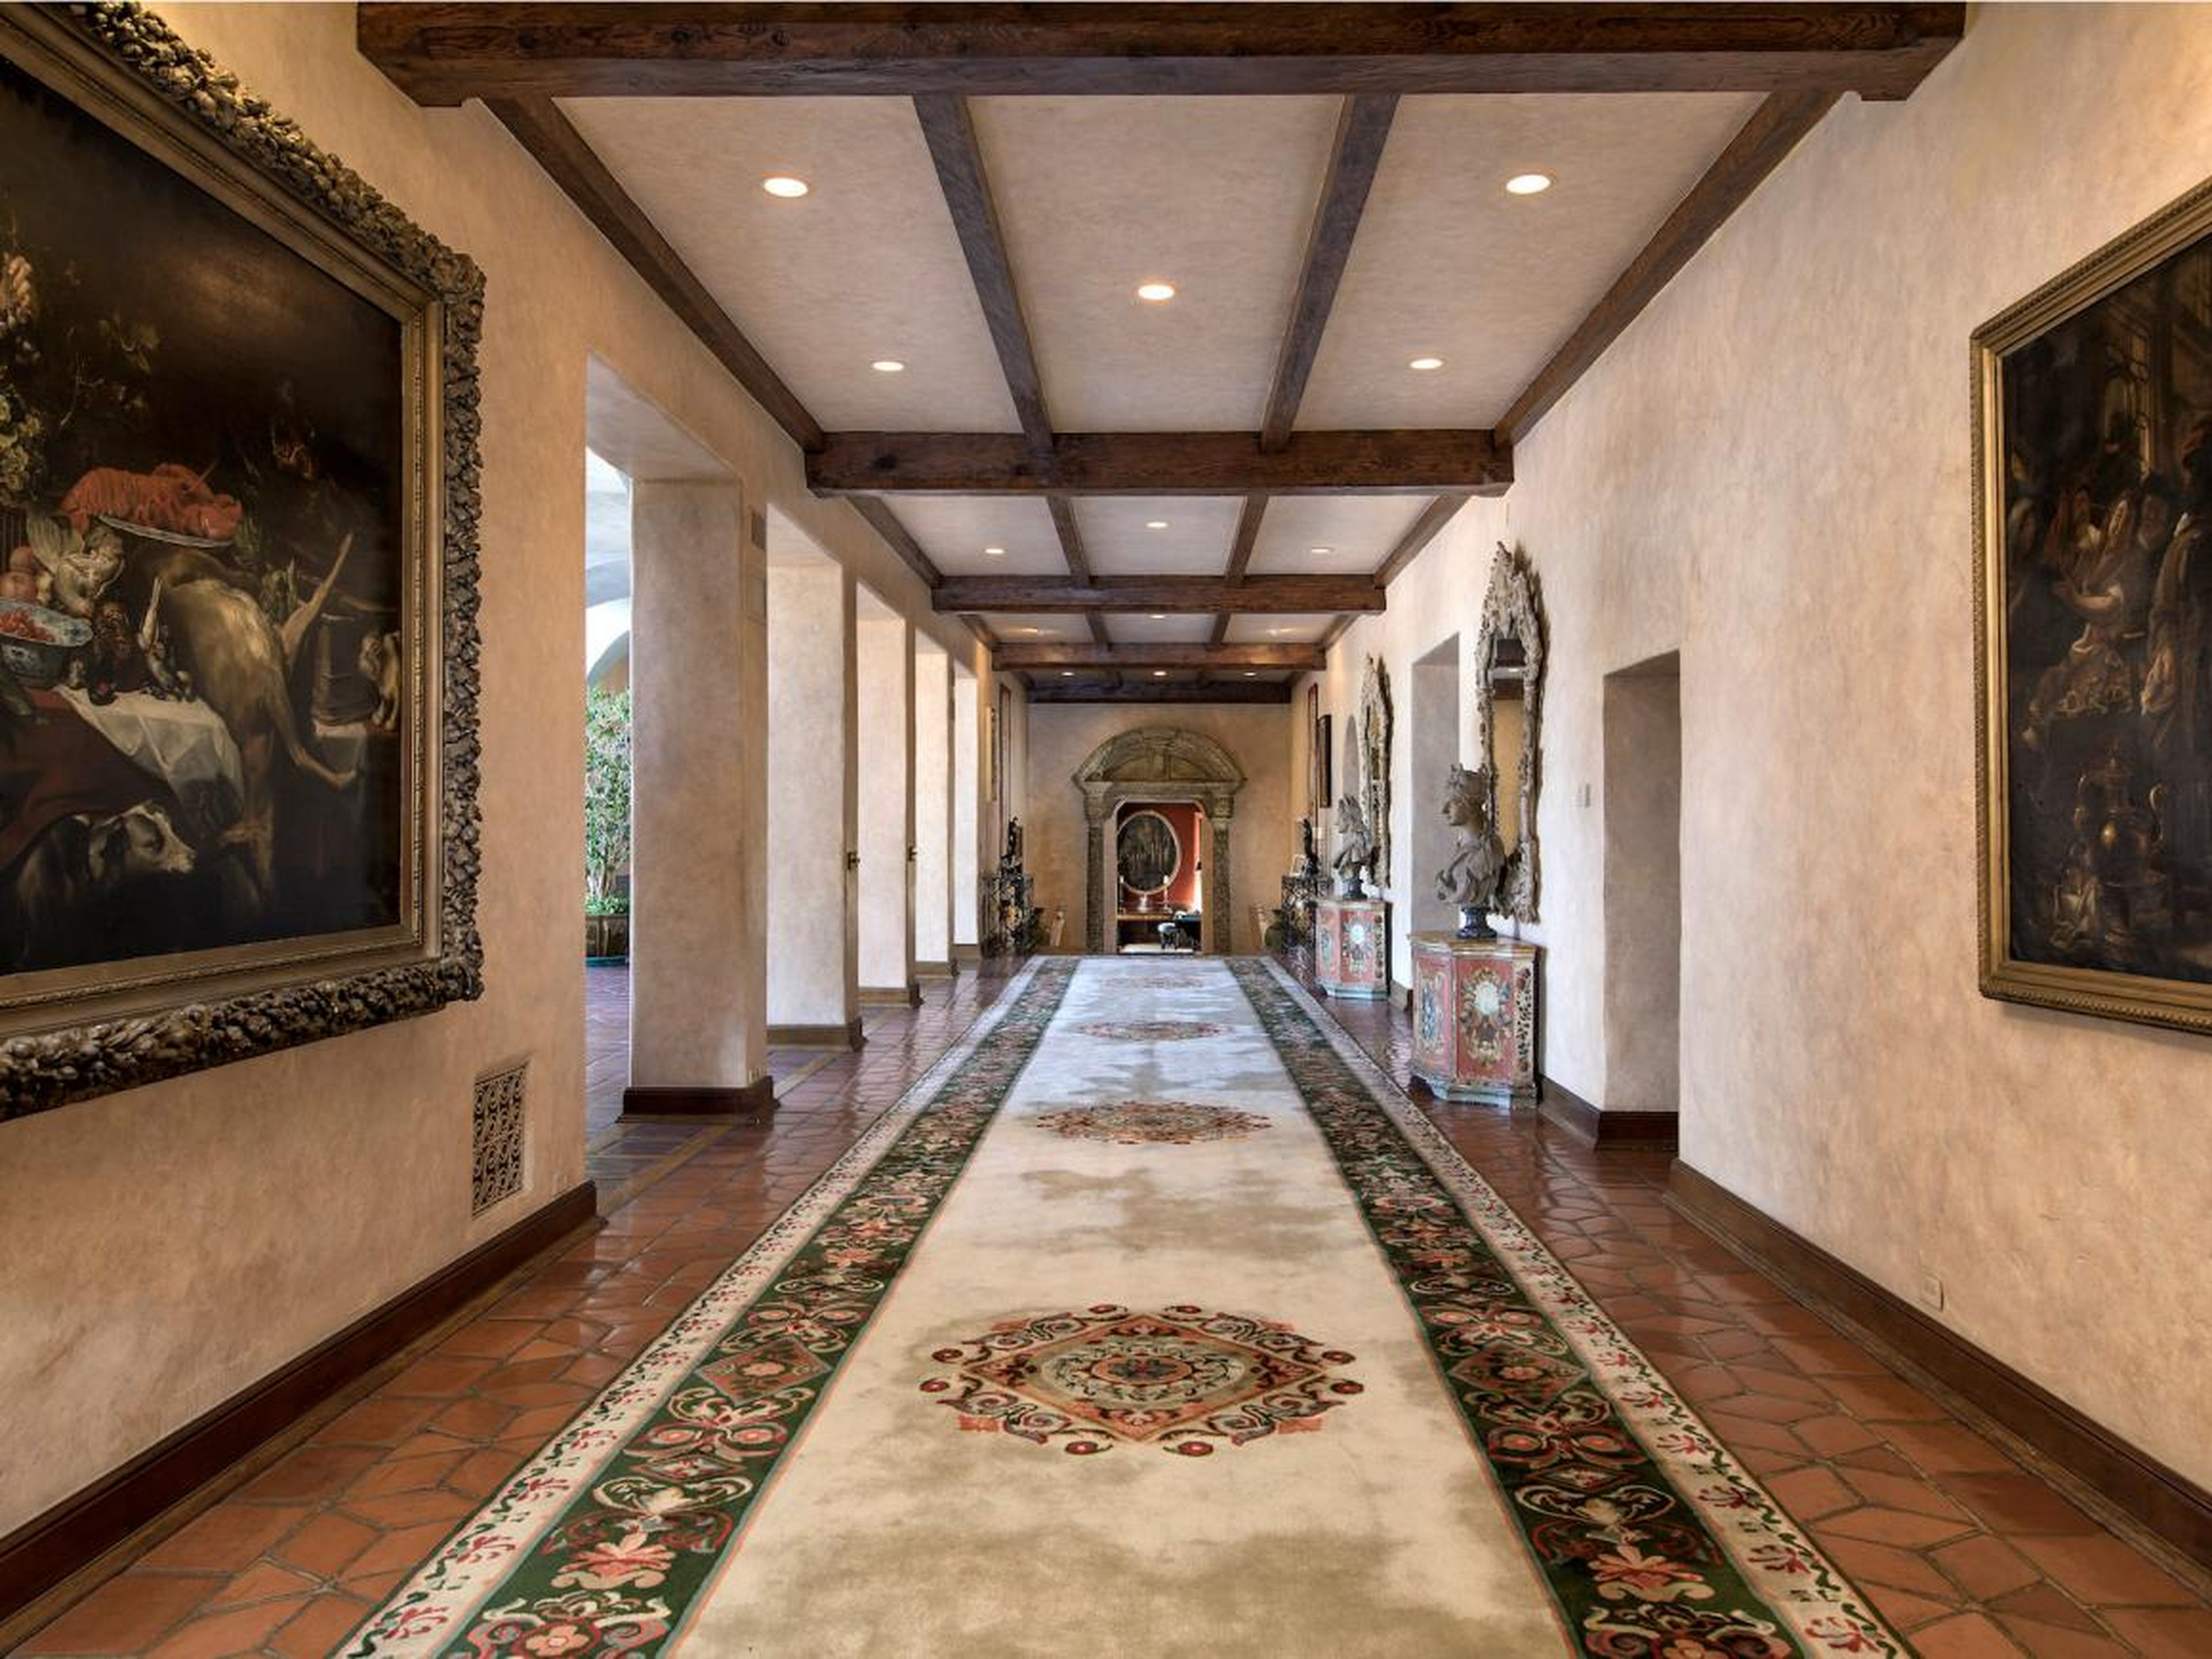 A stroll through the house would take you through its grand hallways, one of which is 82 feet long and the other more than 102 feet with a 40-foot wide mural.